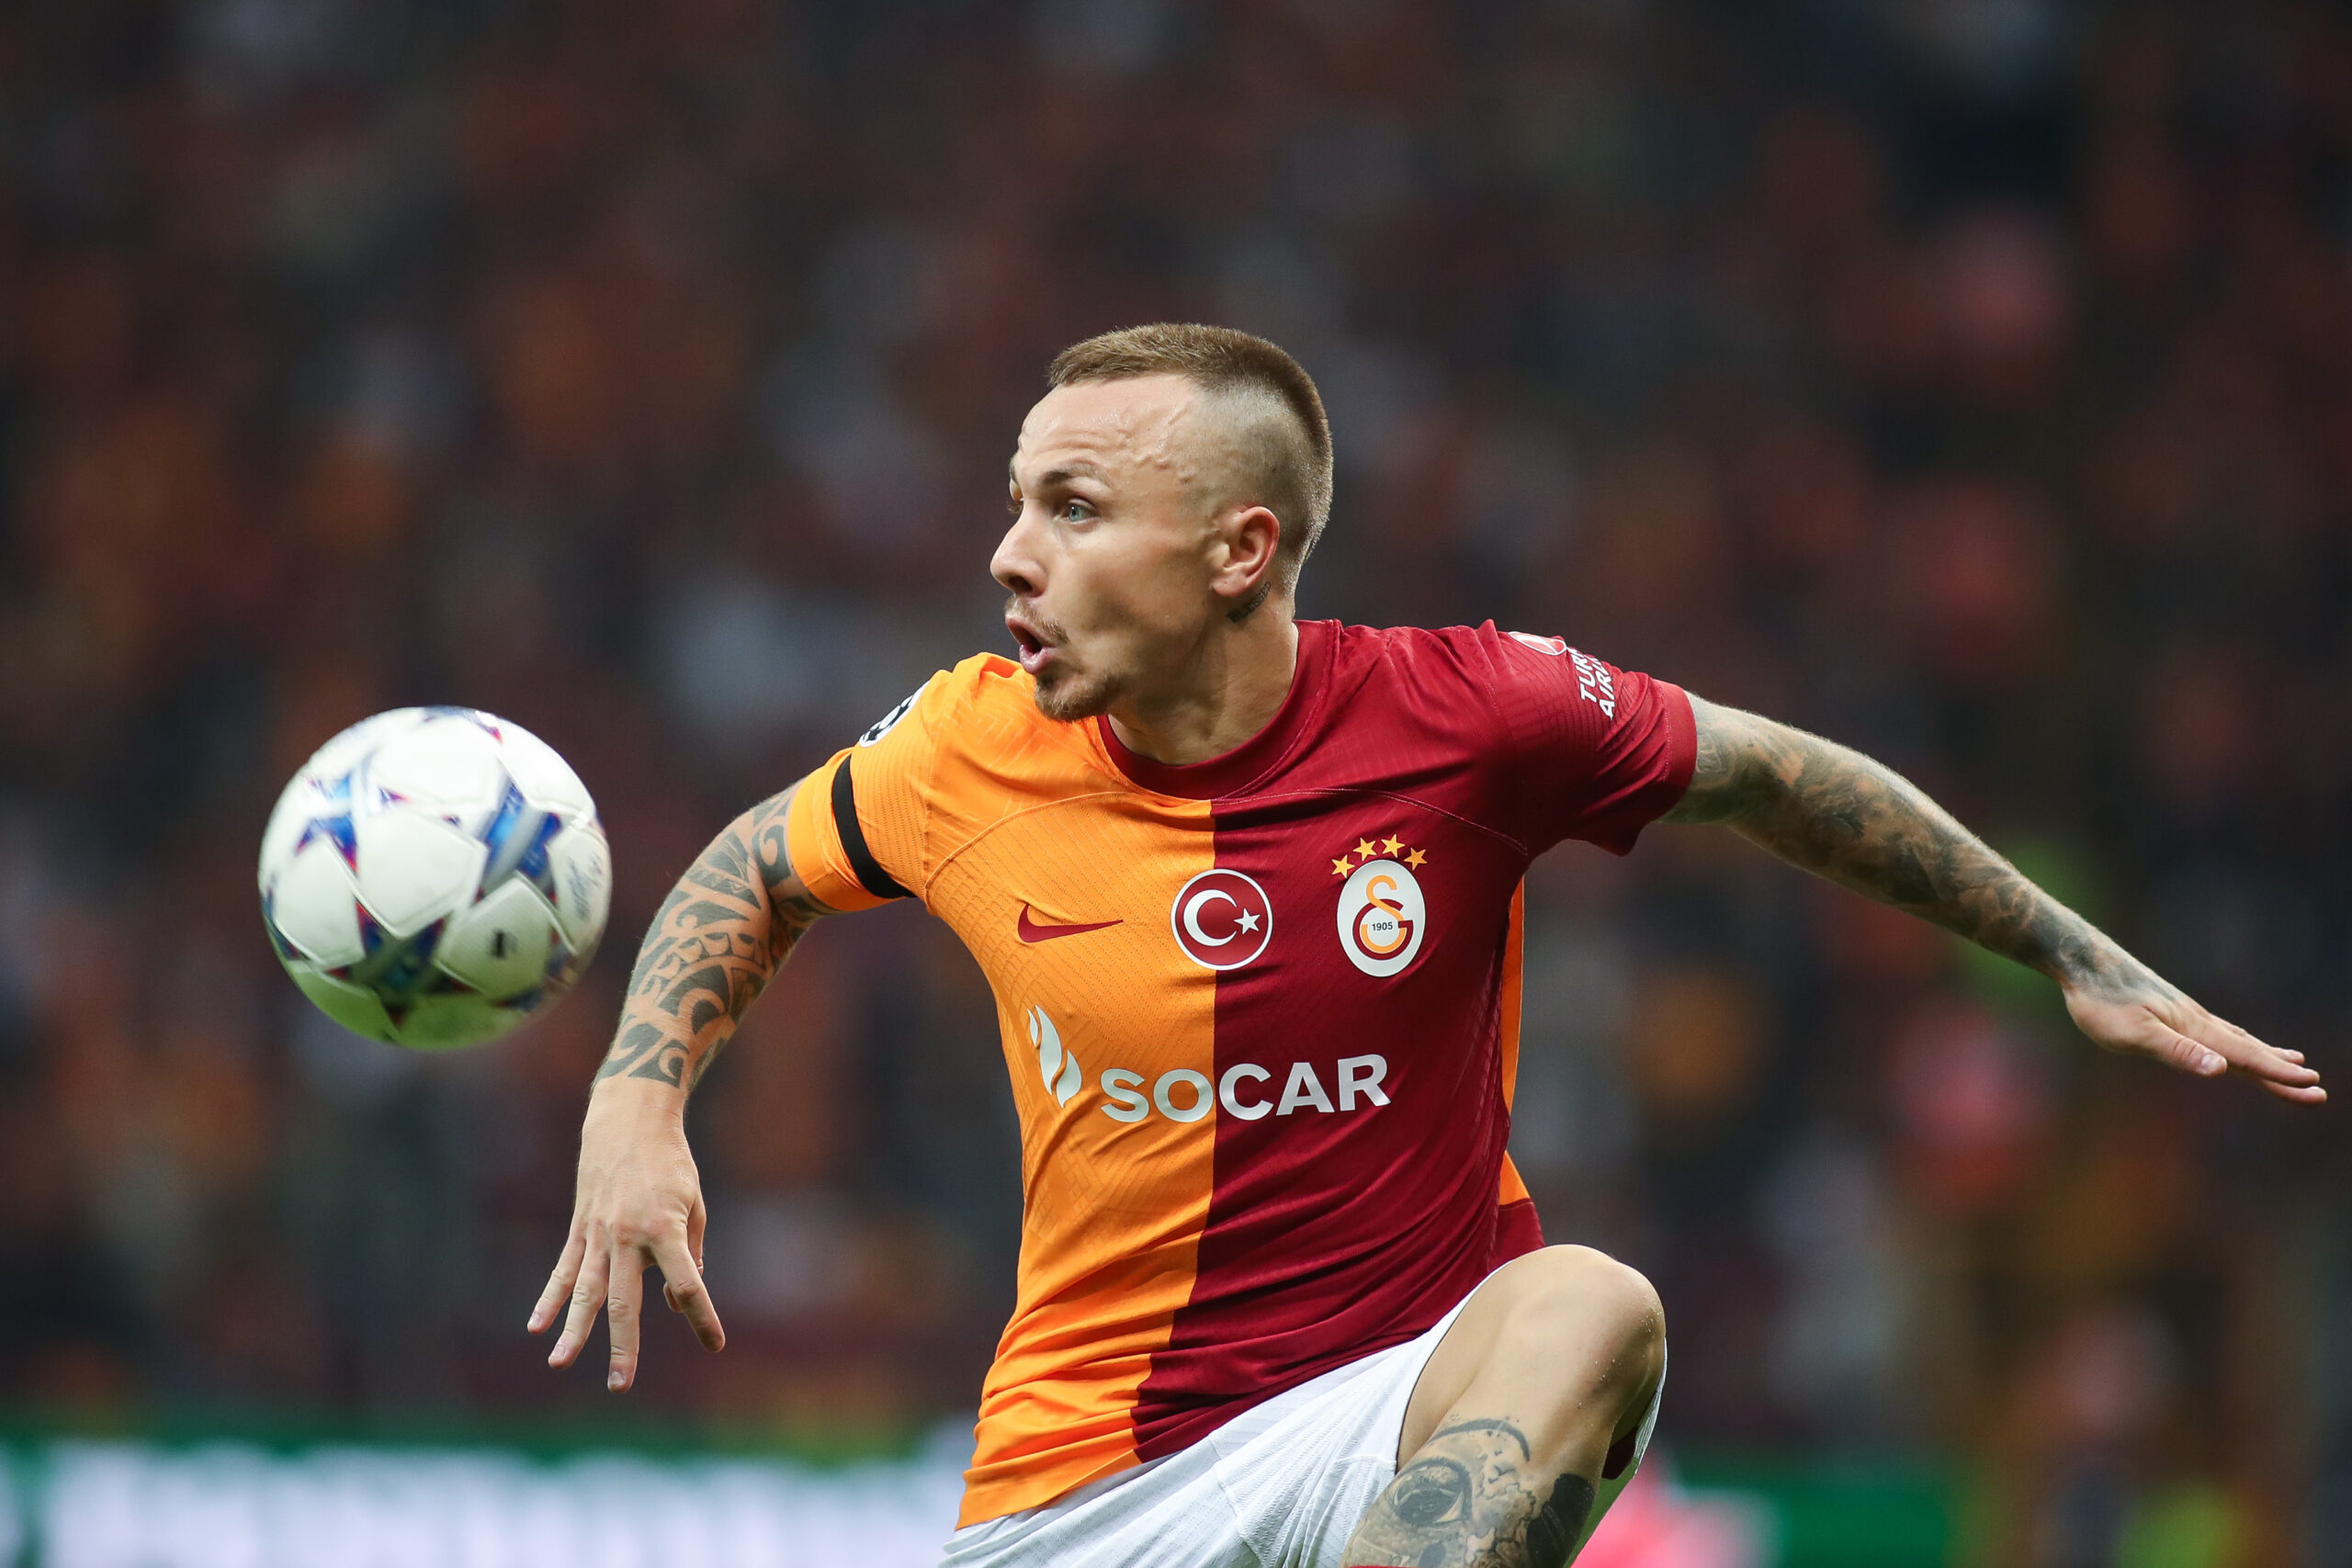 Roma have found the left-back they were looking for and completed their second January acquisition, as Angelino landed in Italy to finalize his switch.